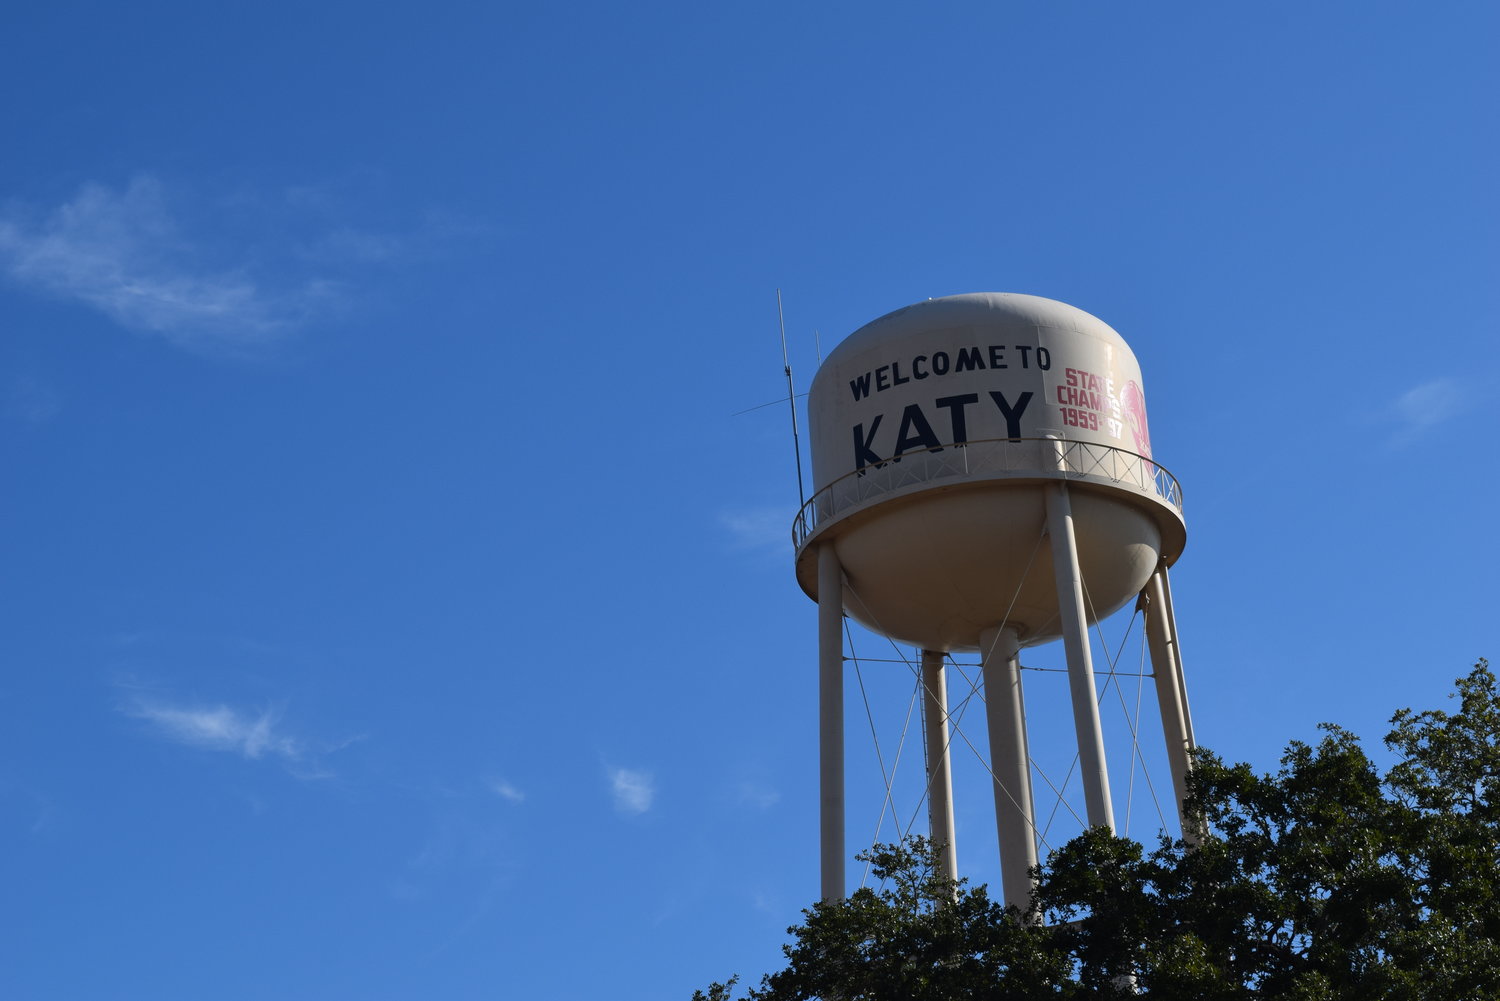 Two new water tanks are coming to Katy. An elevated tank that will sport the city's recognizable goose mural and a ground-based tank that will hold one million gallons of water.